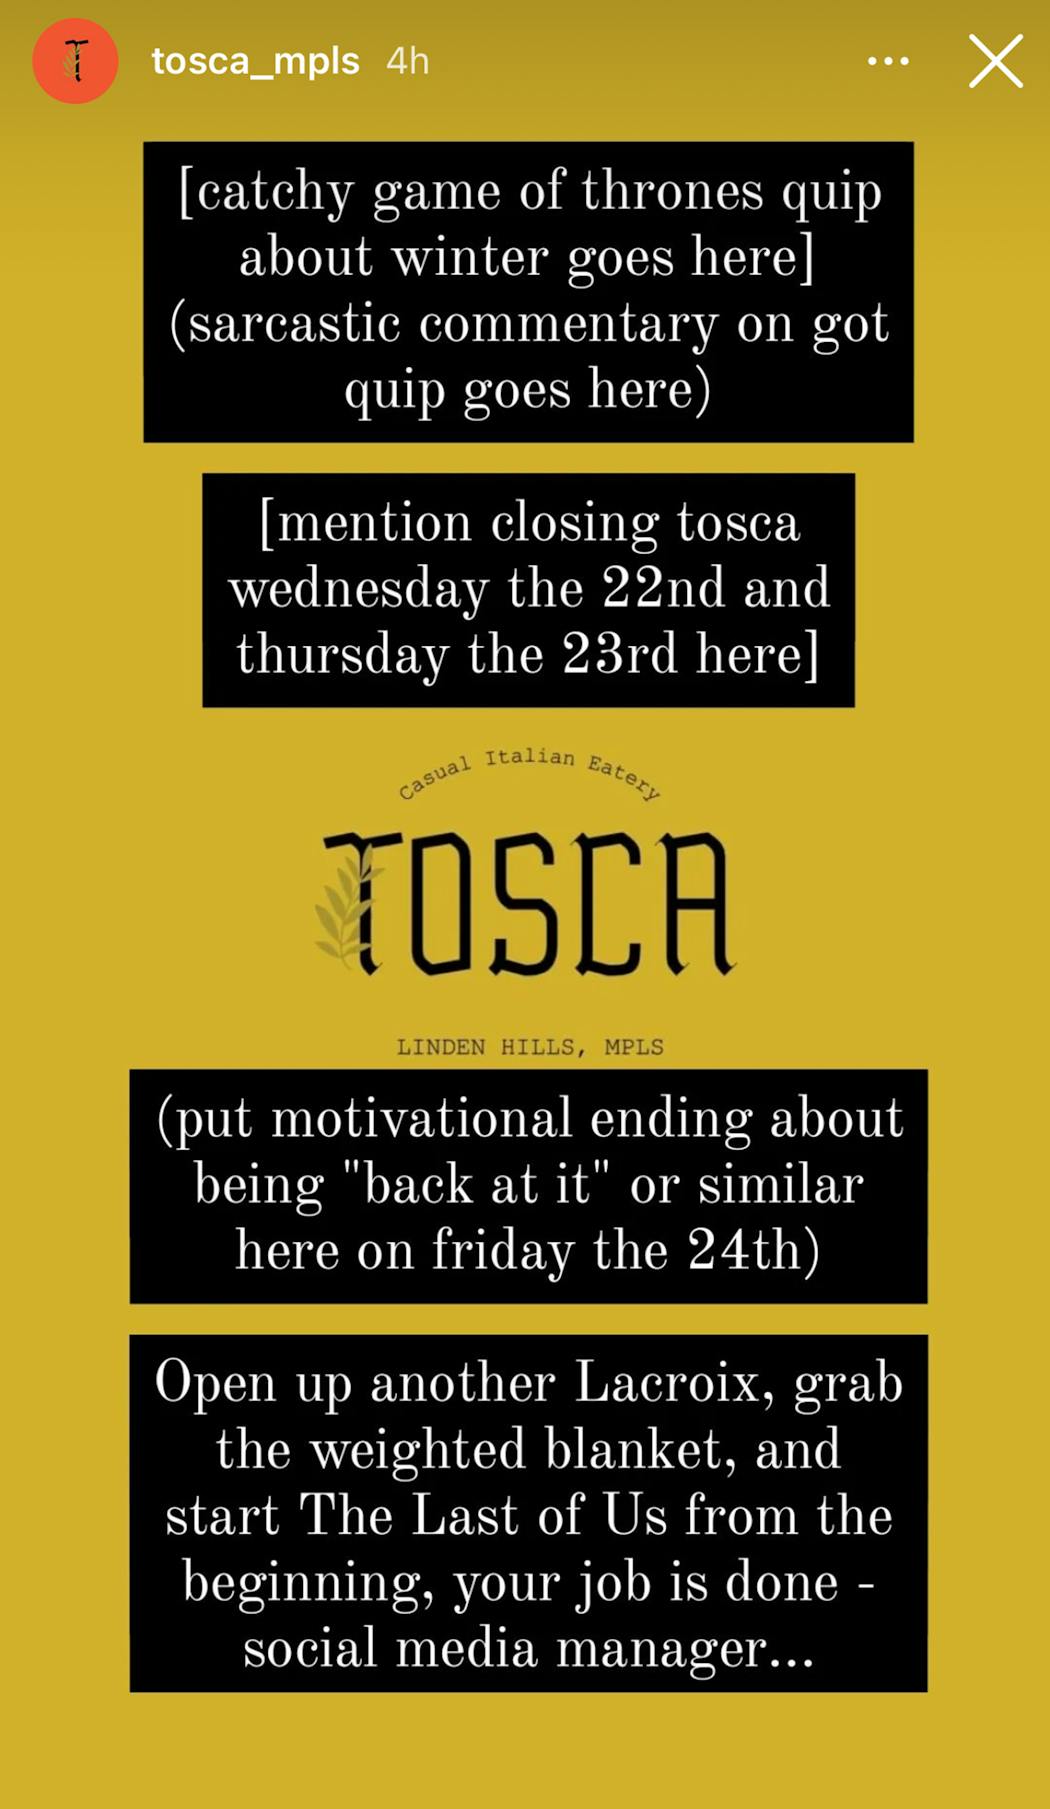 Tosca put a creative spin on a weather closing.